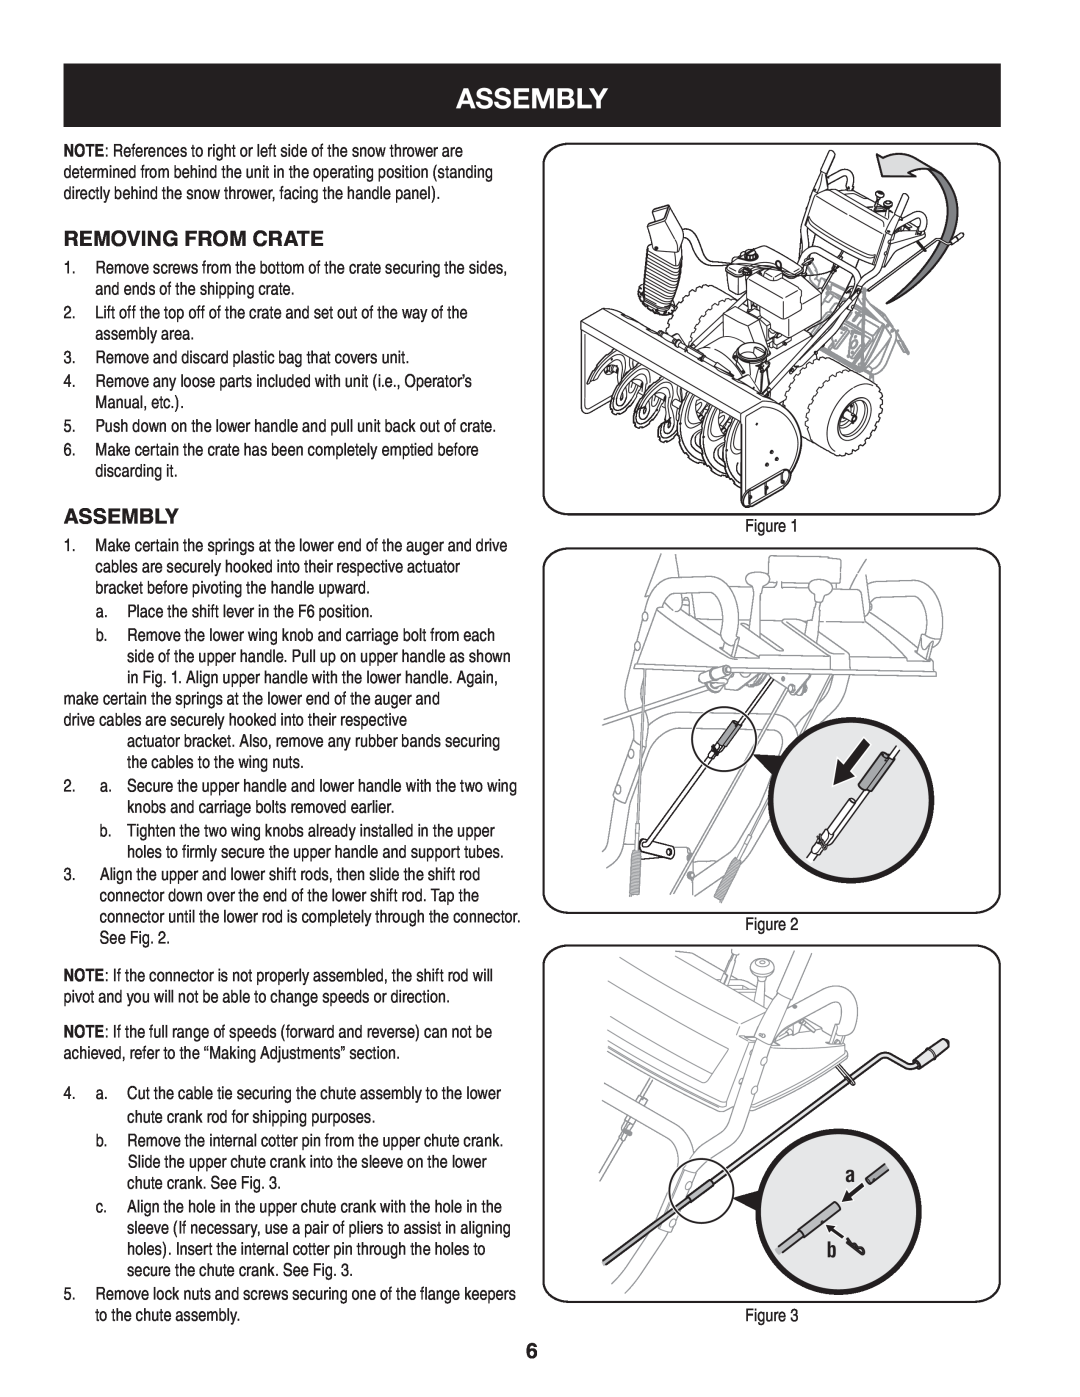 Craftsman 247.88045 manual Assembly, Removing From Crate, assembly 